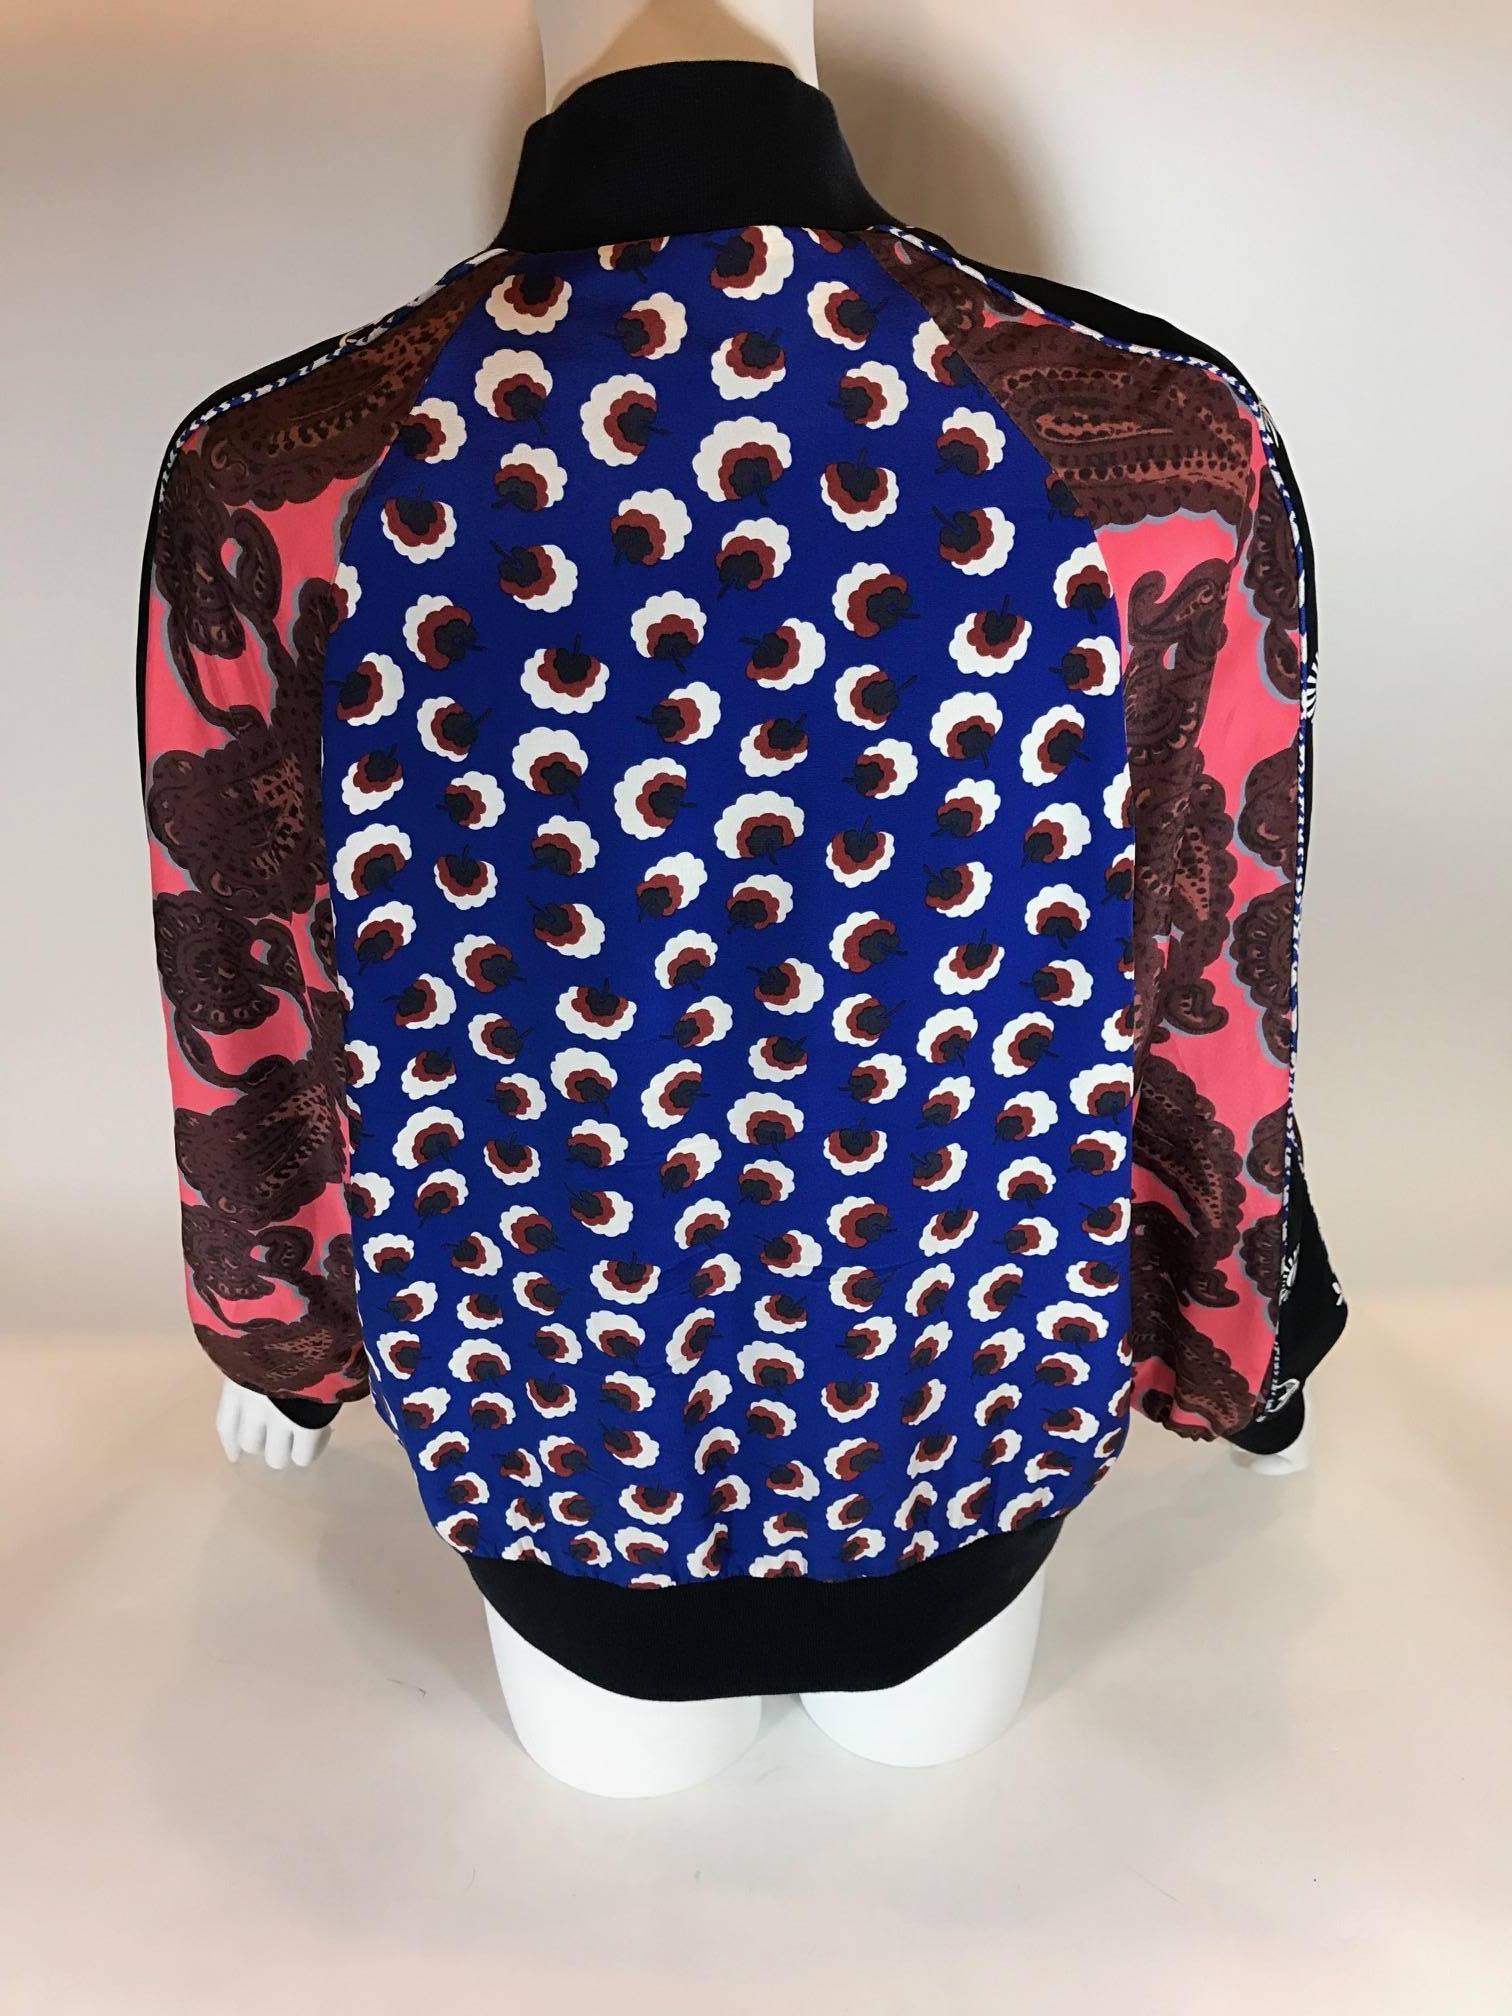 Stella McCartney does it right with this floral and paisley print bomber jacket. Ageless silk jacket framed by ribbed knit trim at the collar, cuffs and hem.
25